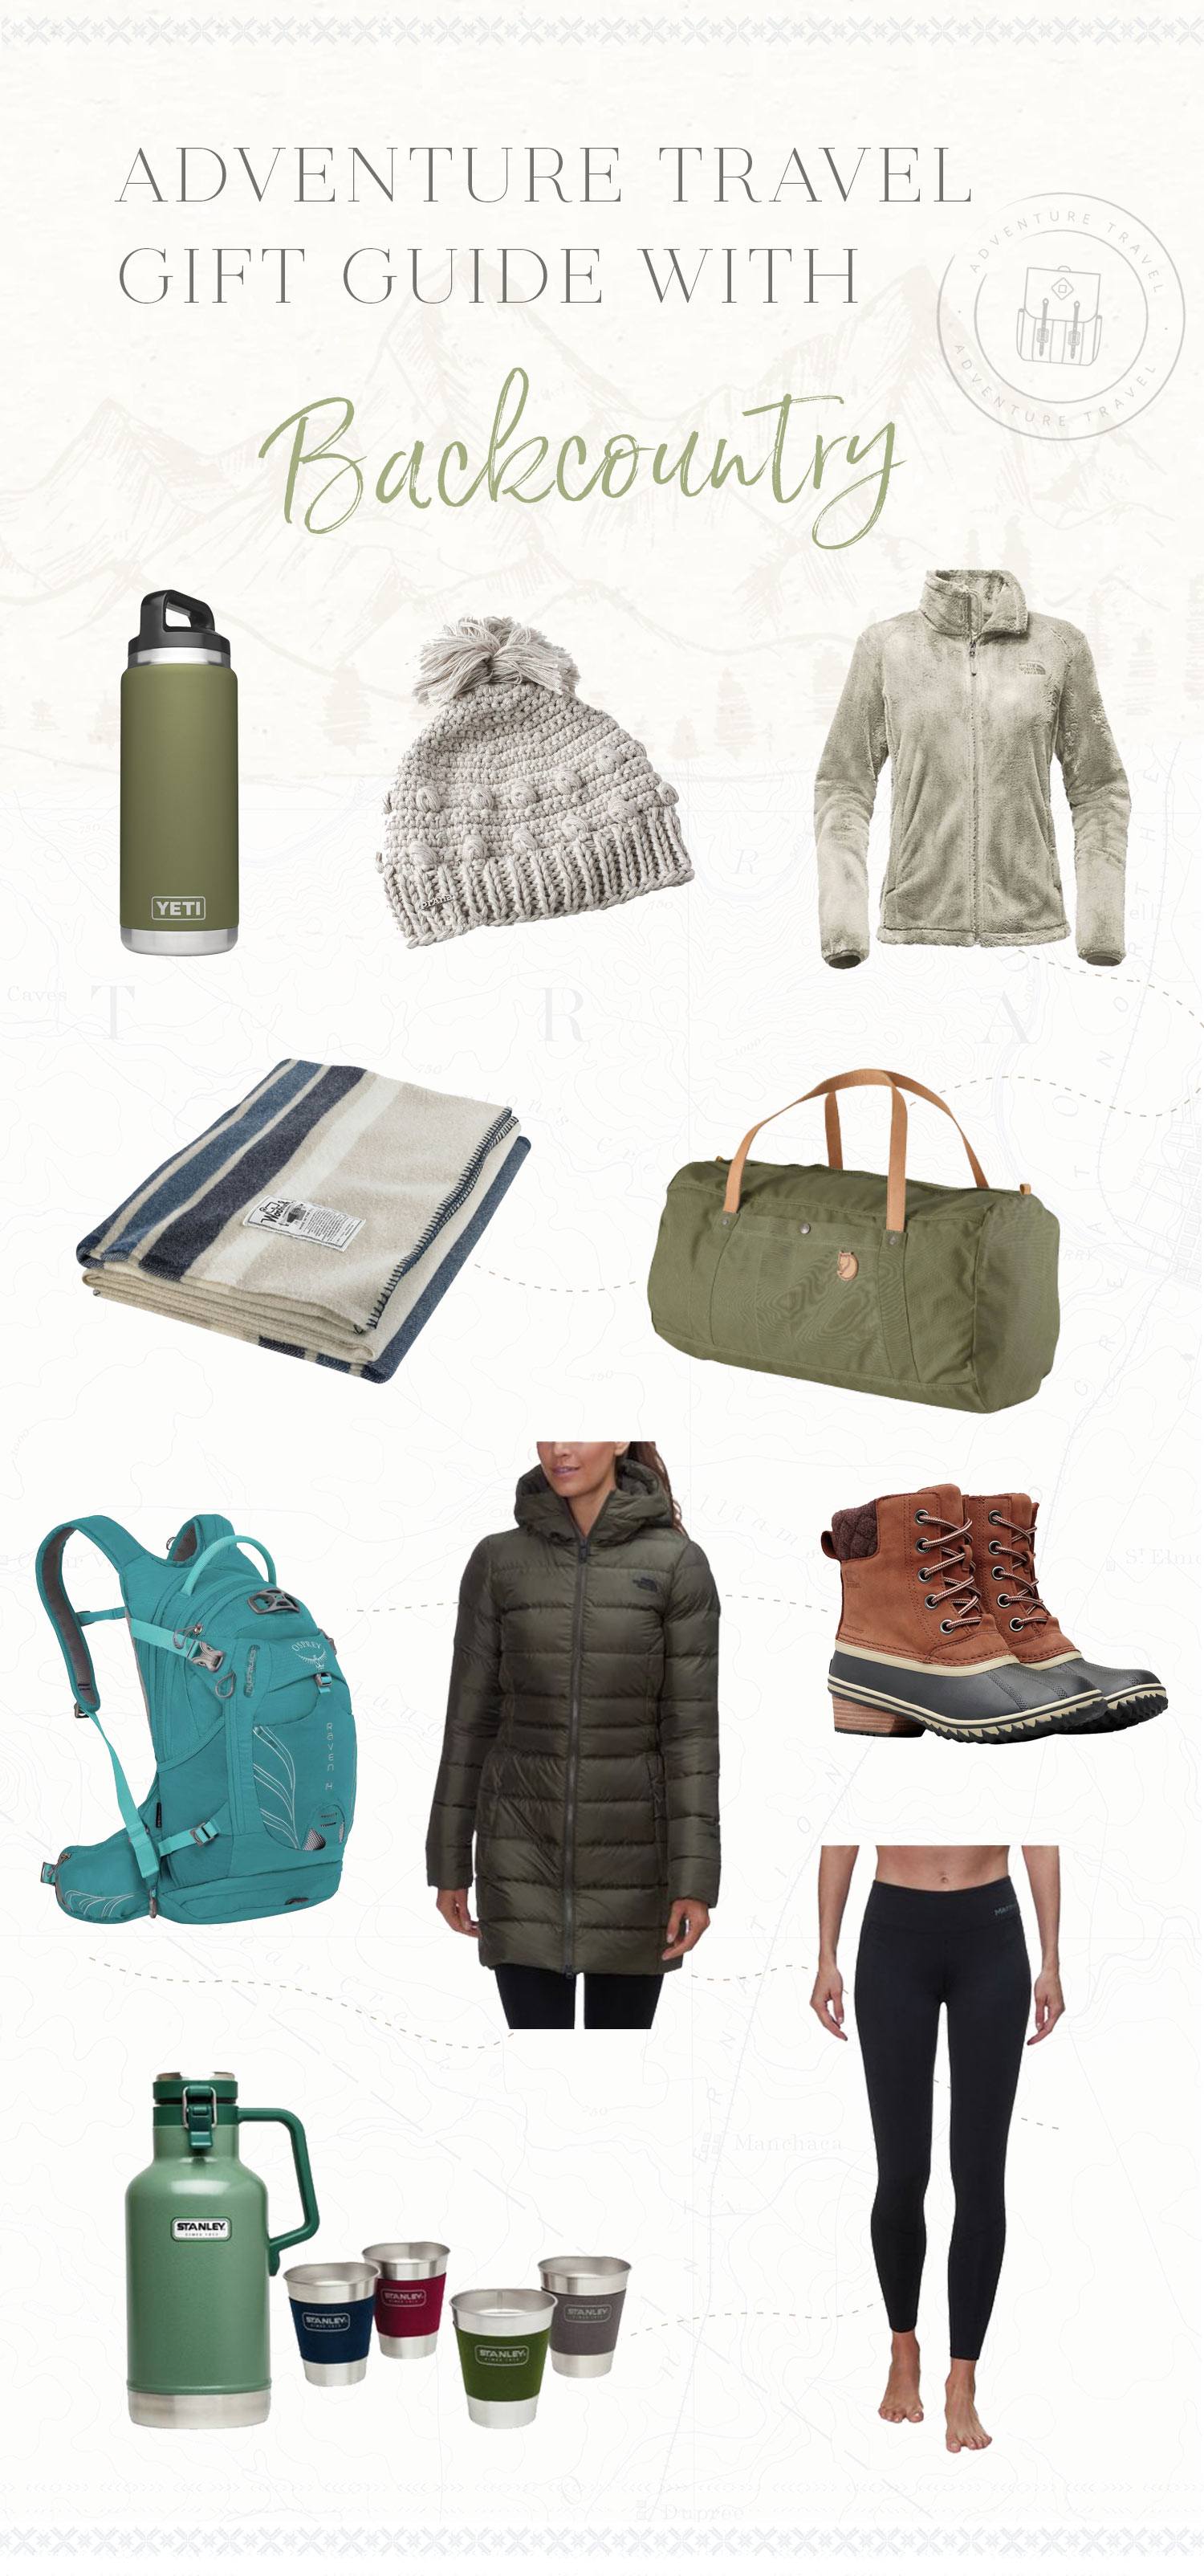 Adventure Travel Gift Guide with Backcountry